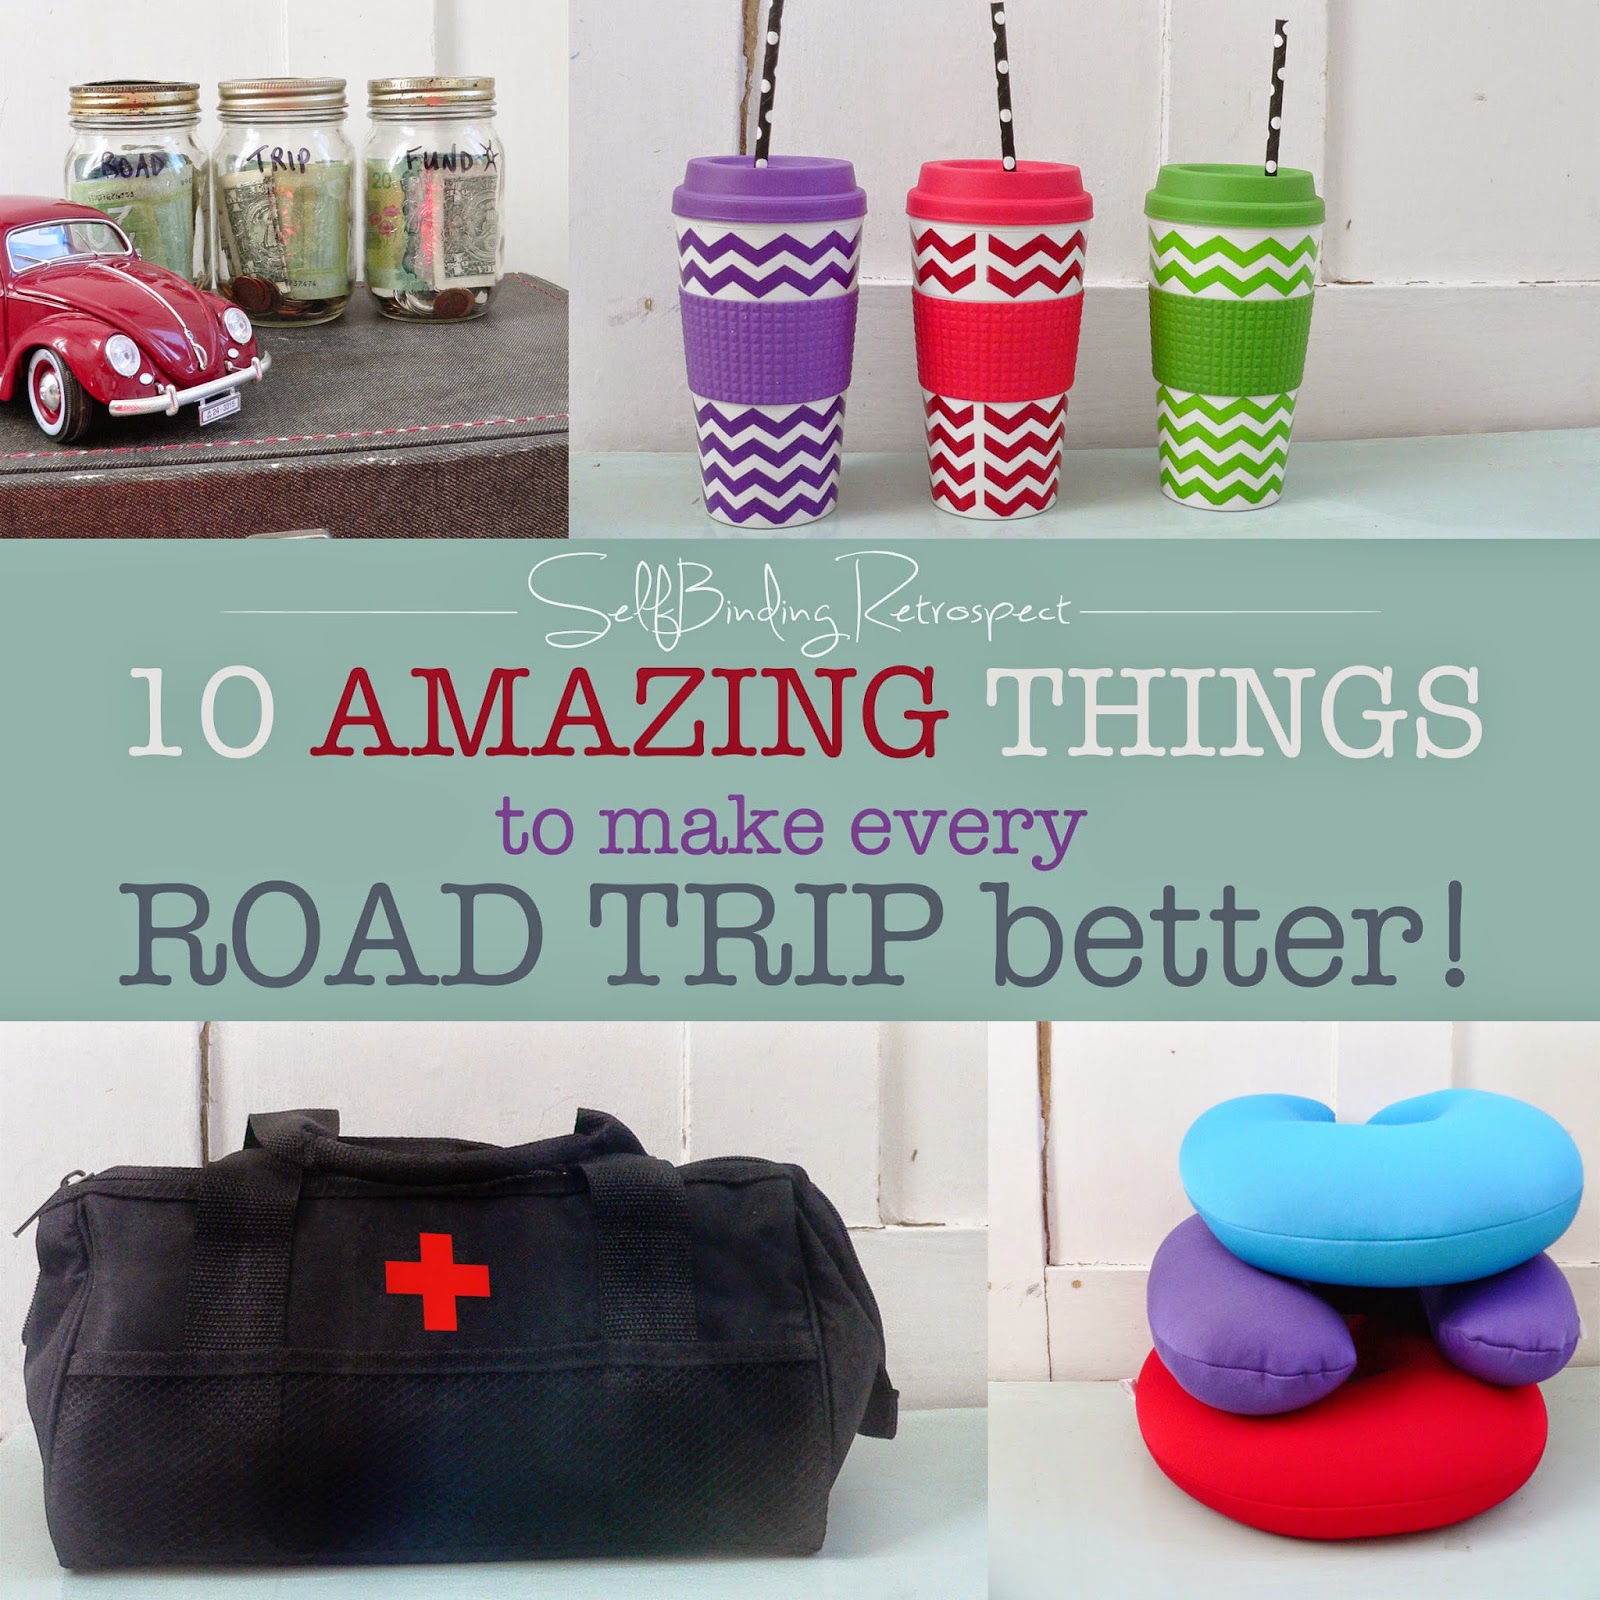 10 amazing things to make every road trip better